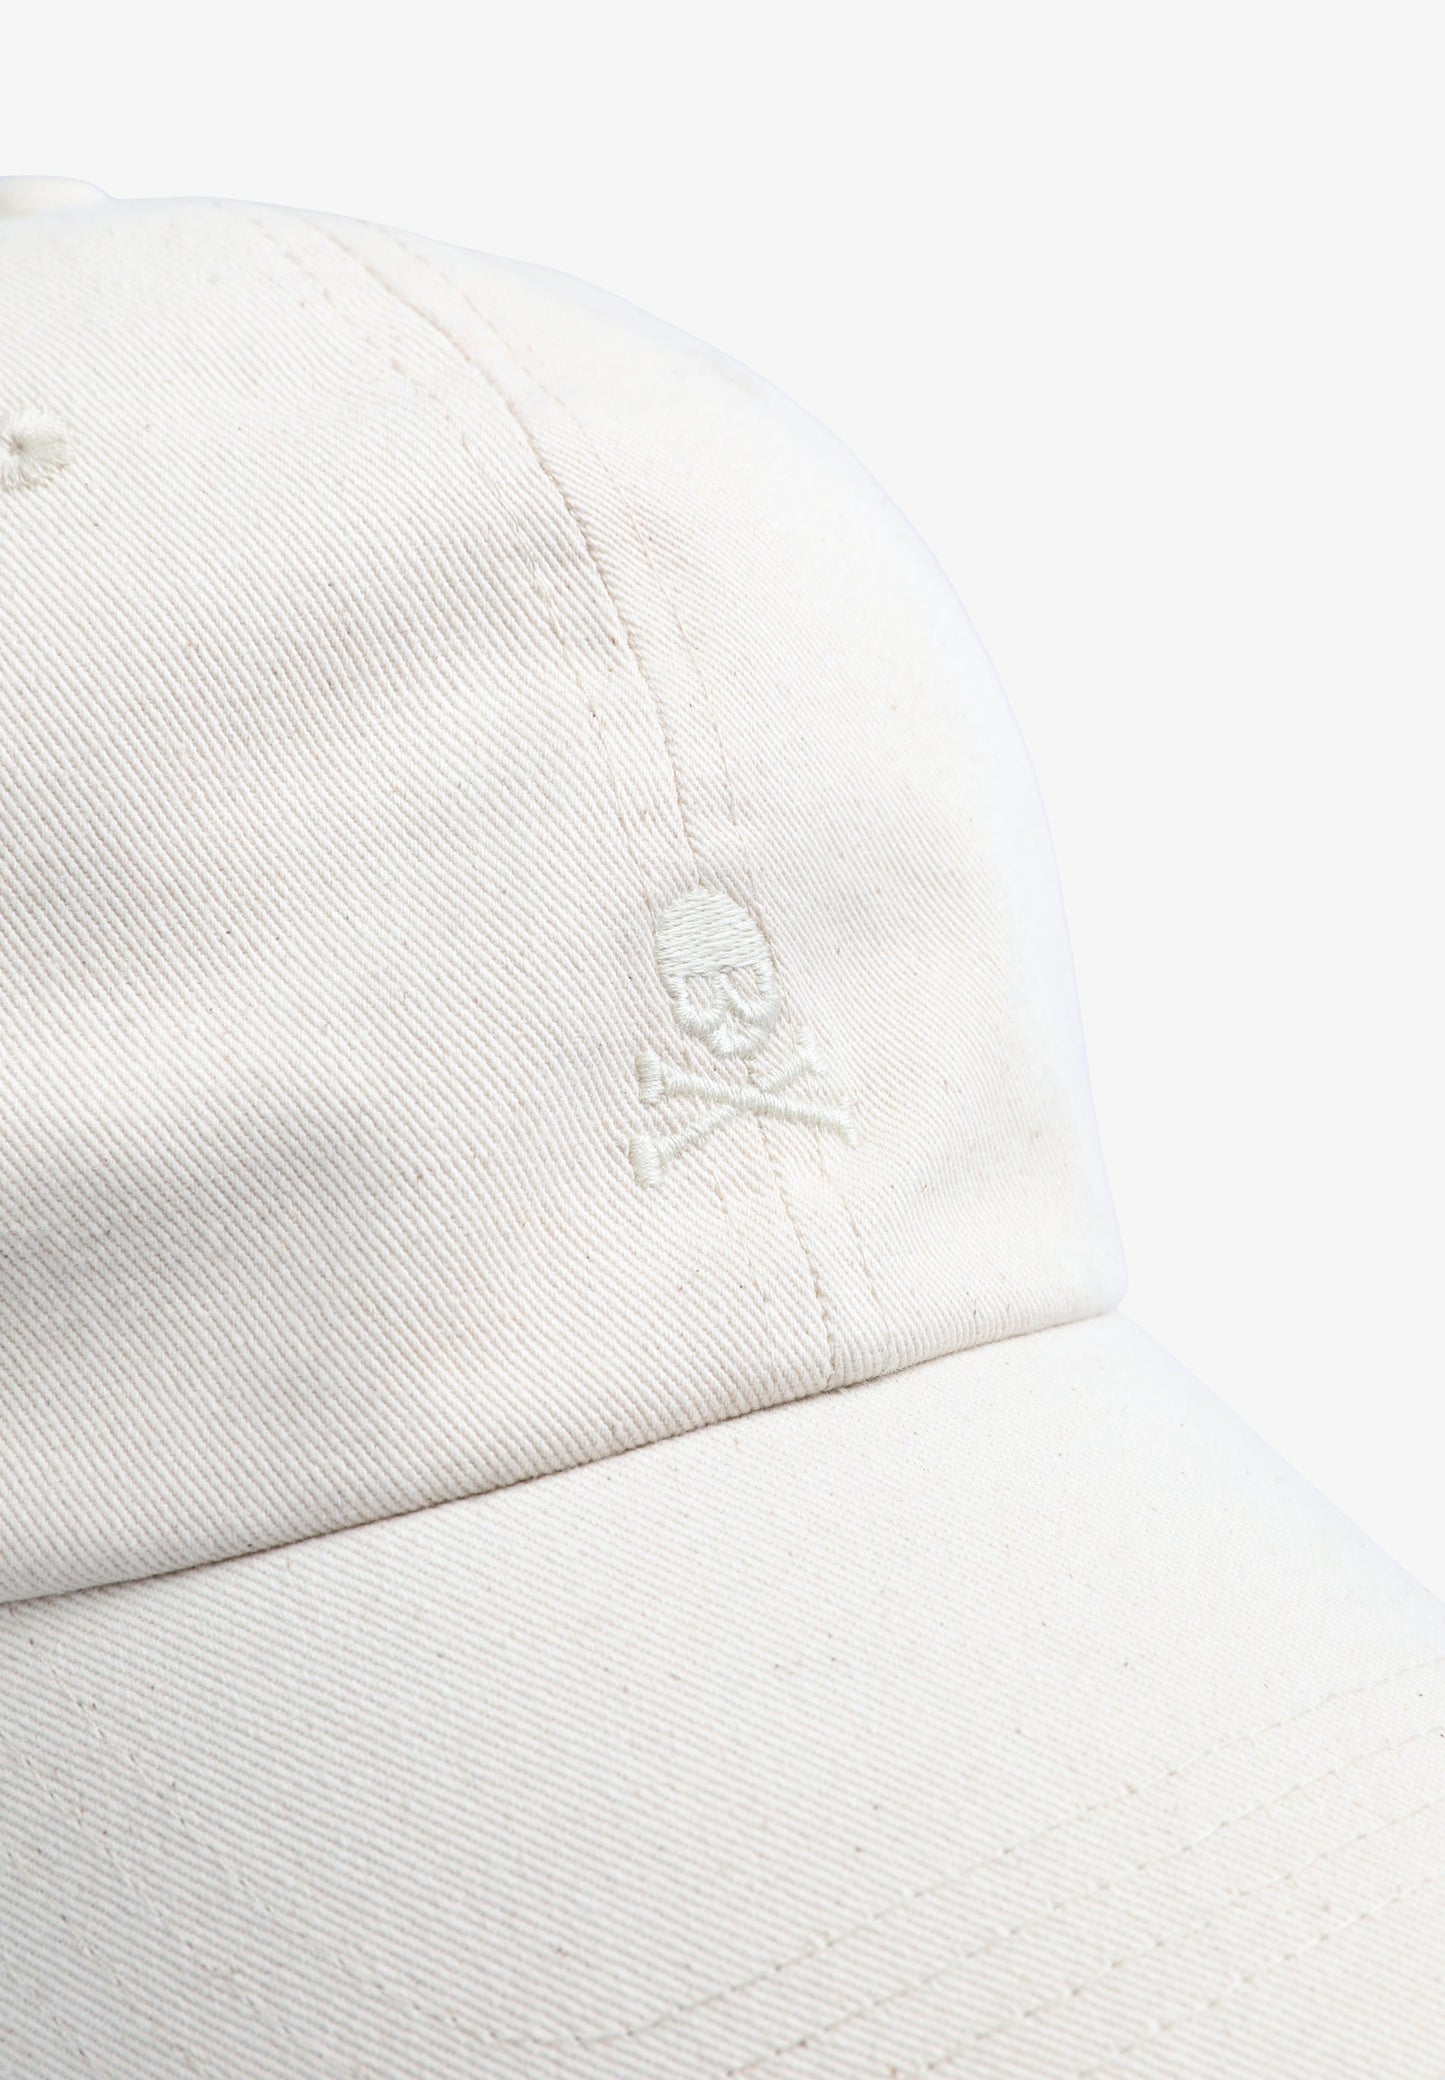 SKULL CAP WITH MATCHING EMBROIDERY